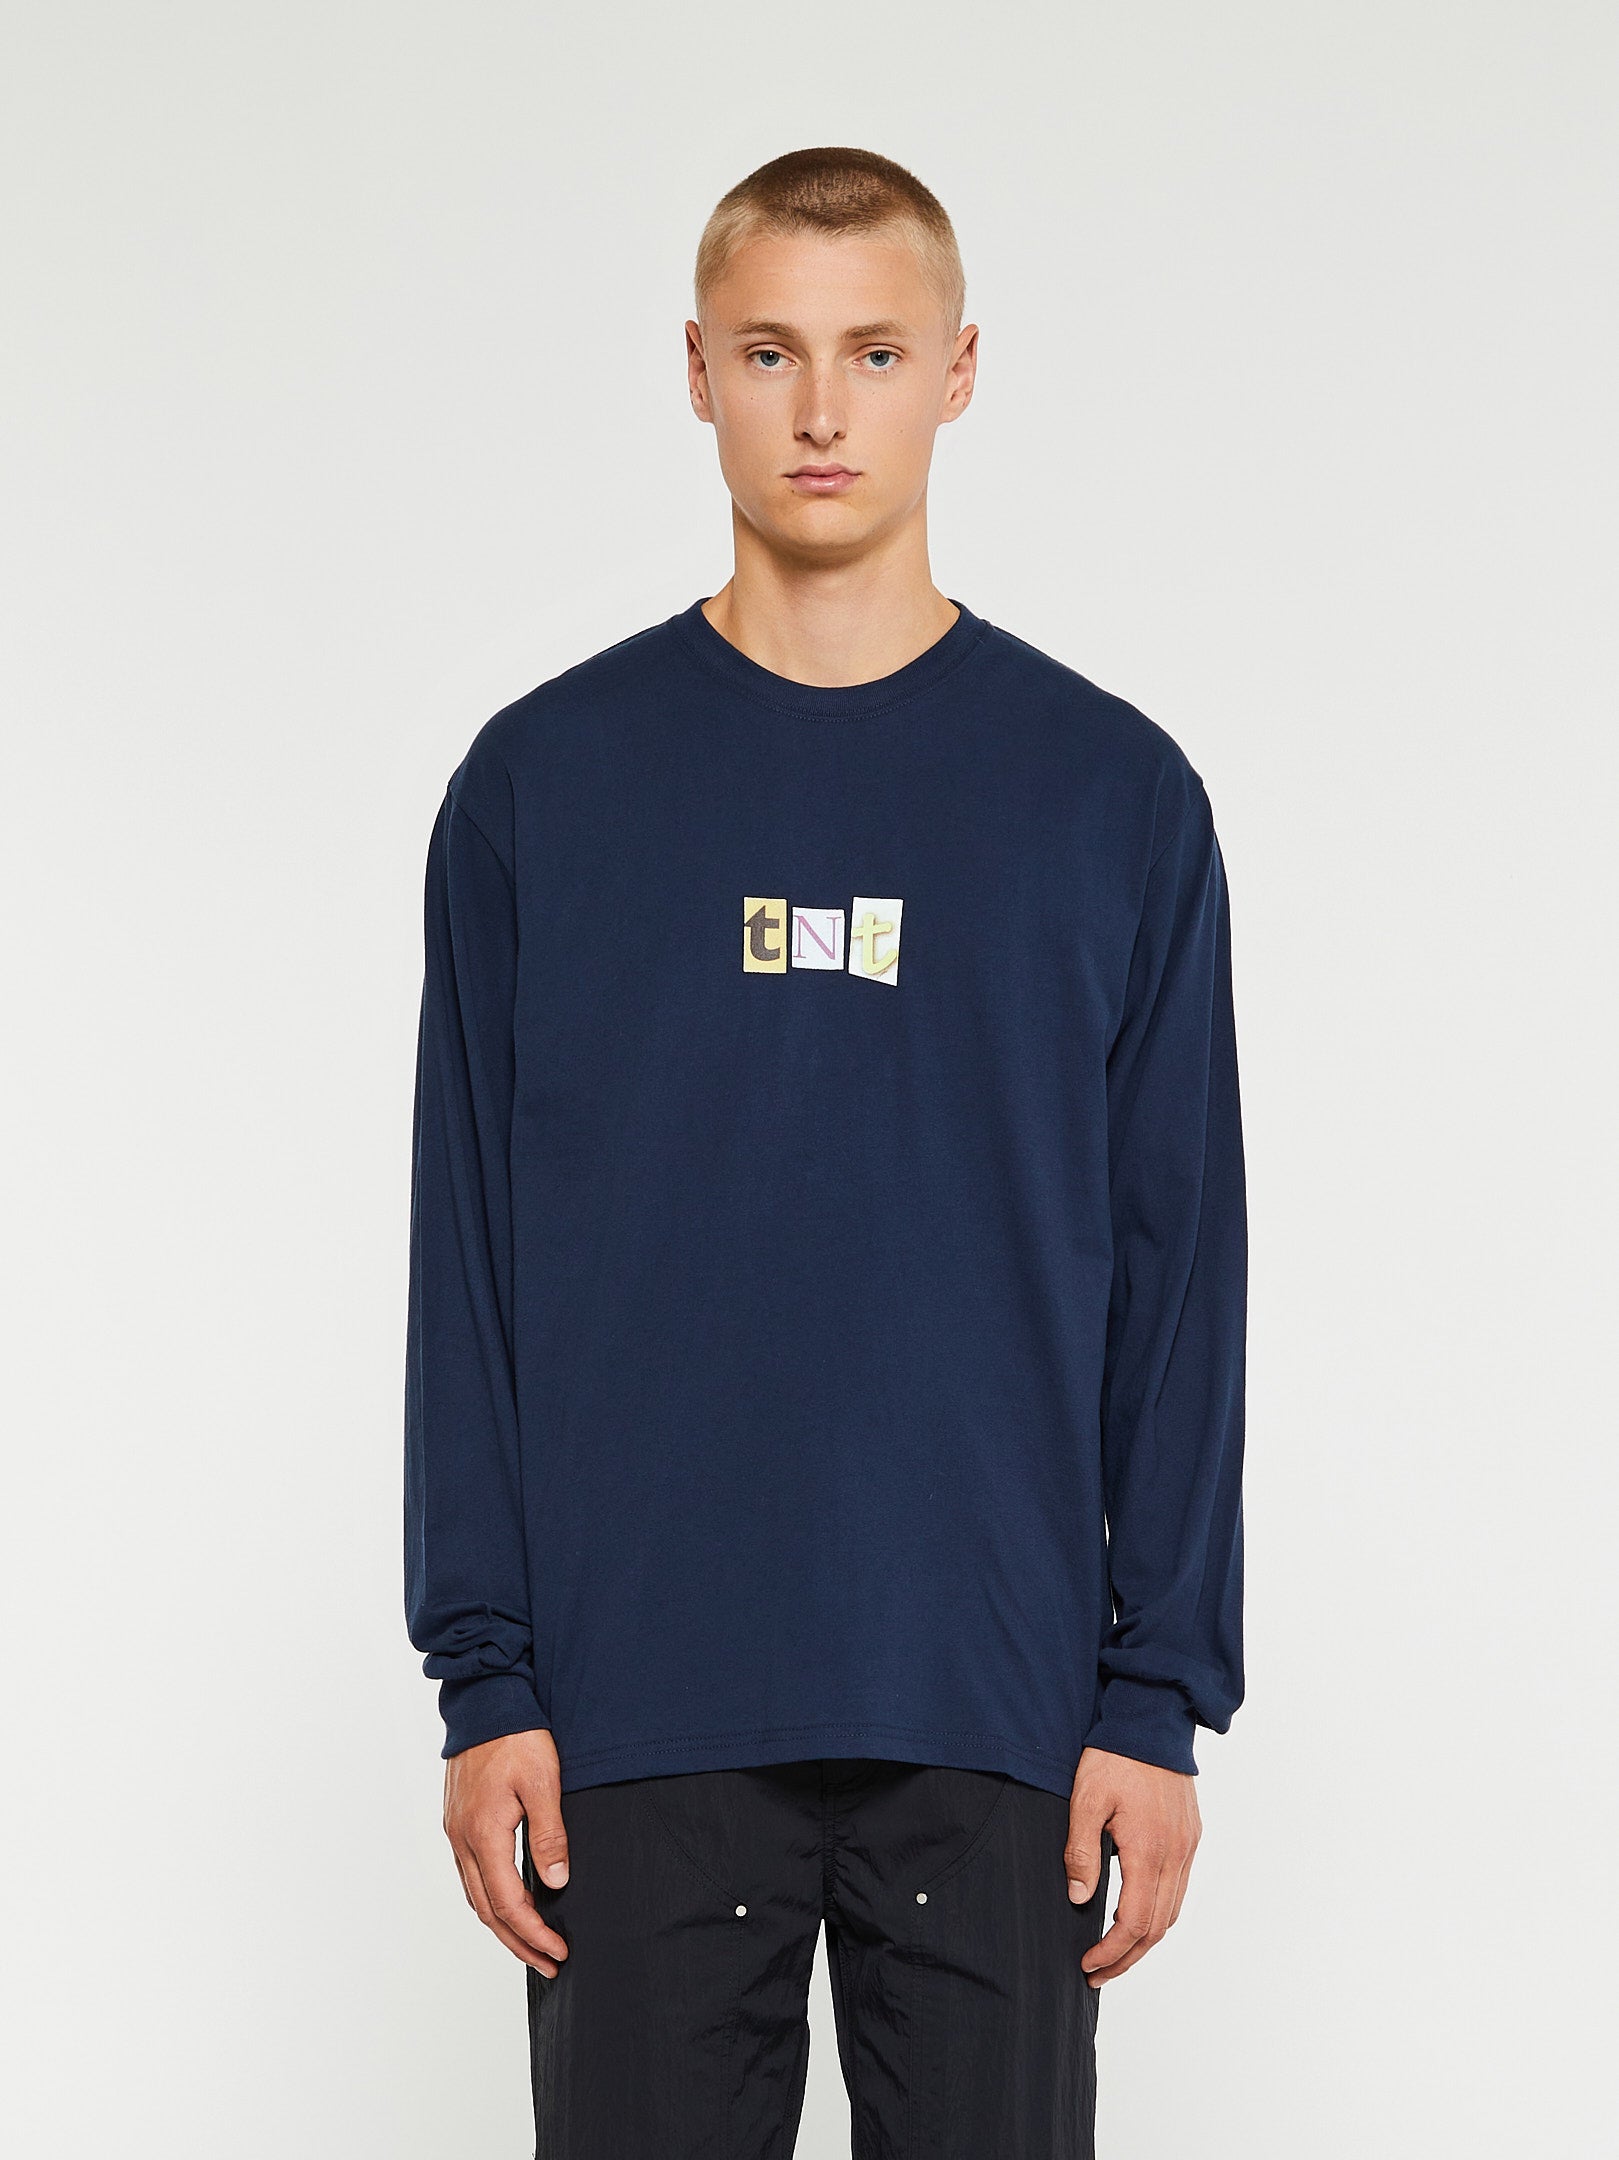 Thisisneverthat - Cutout Letters Longsleeved T-Shirt in Navy